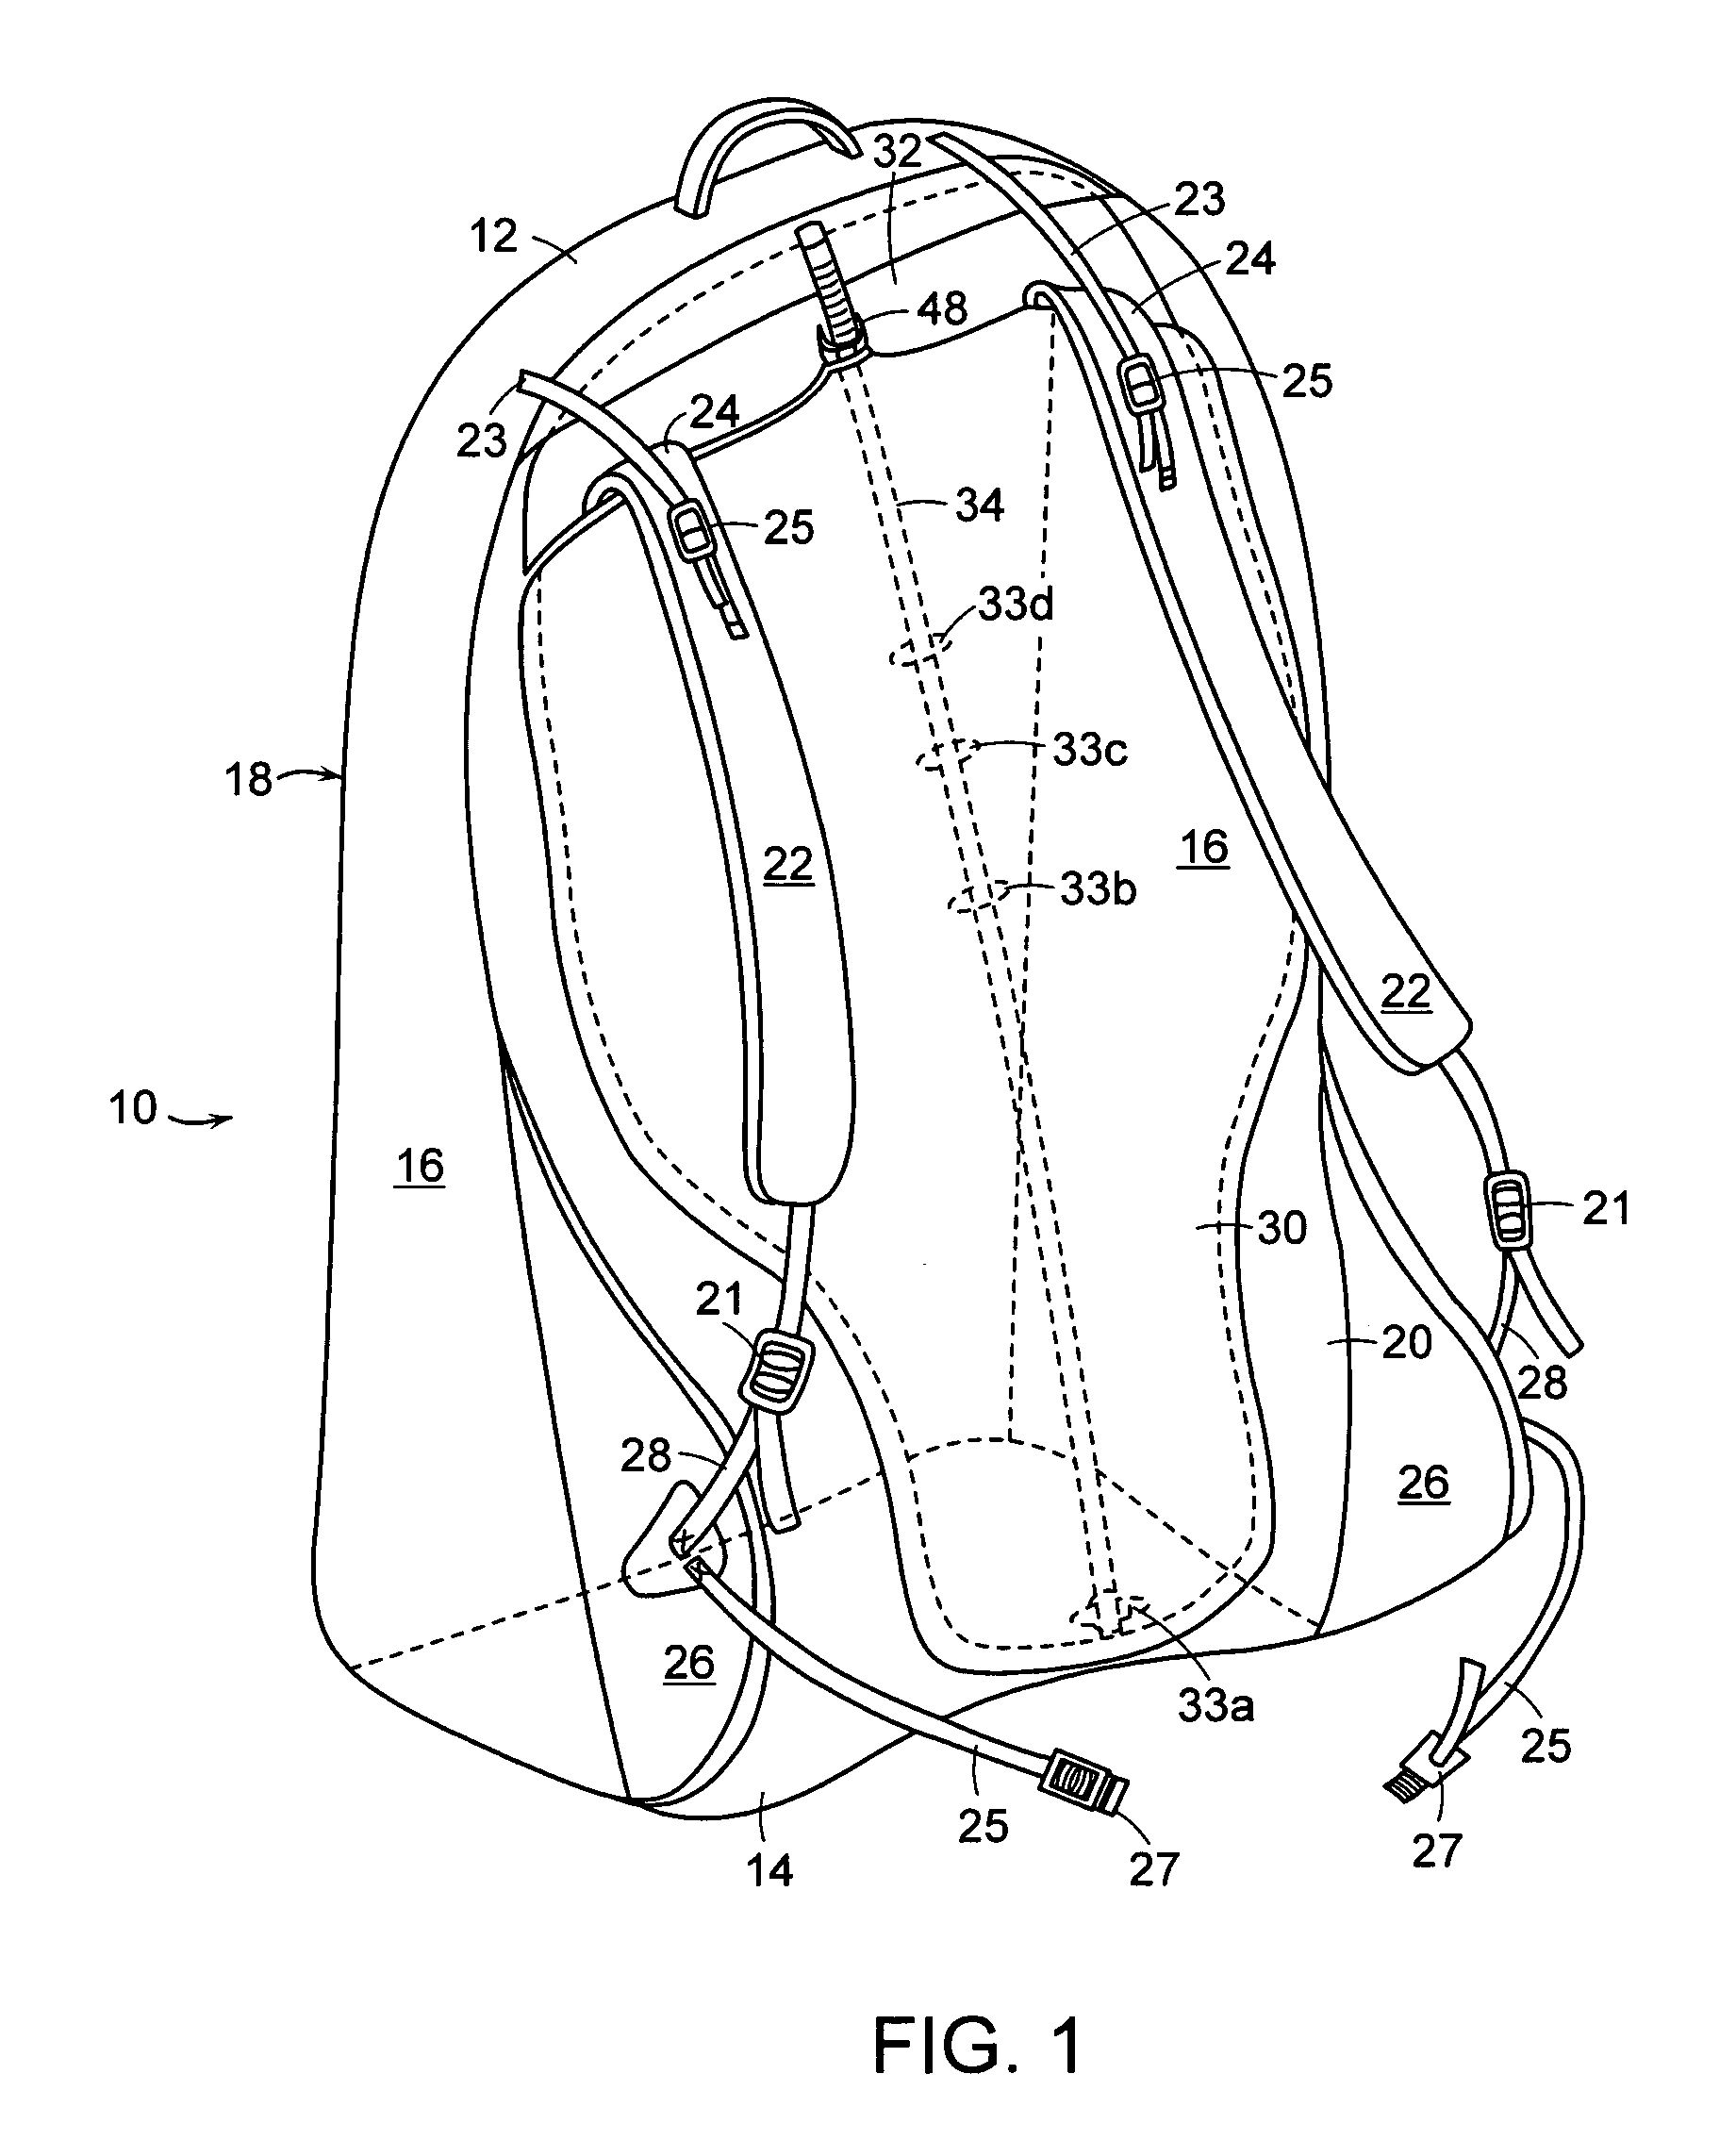 Backpack with lumbar support plate